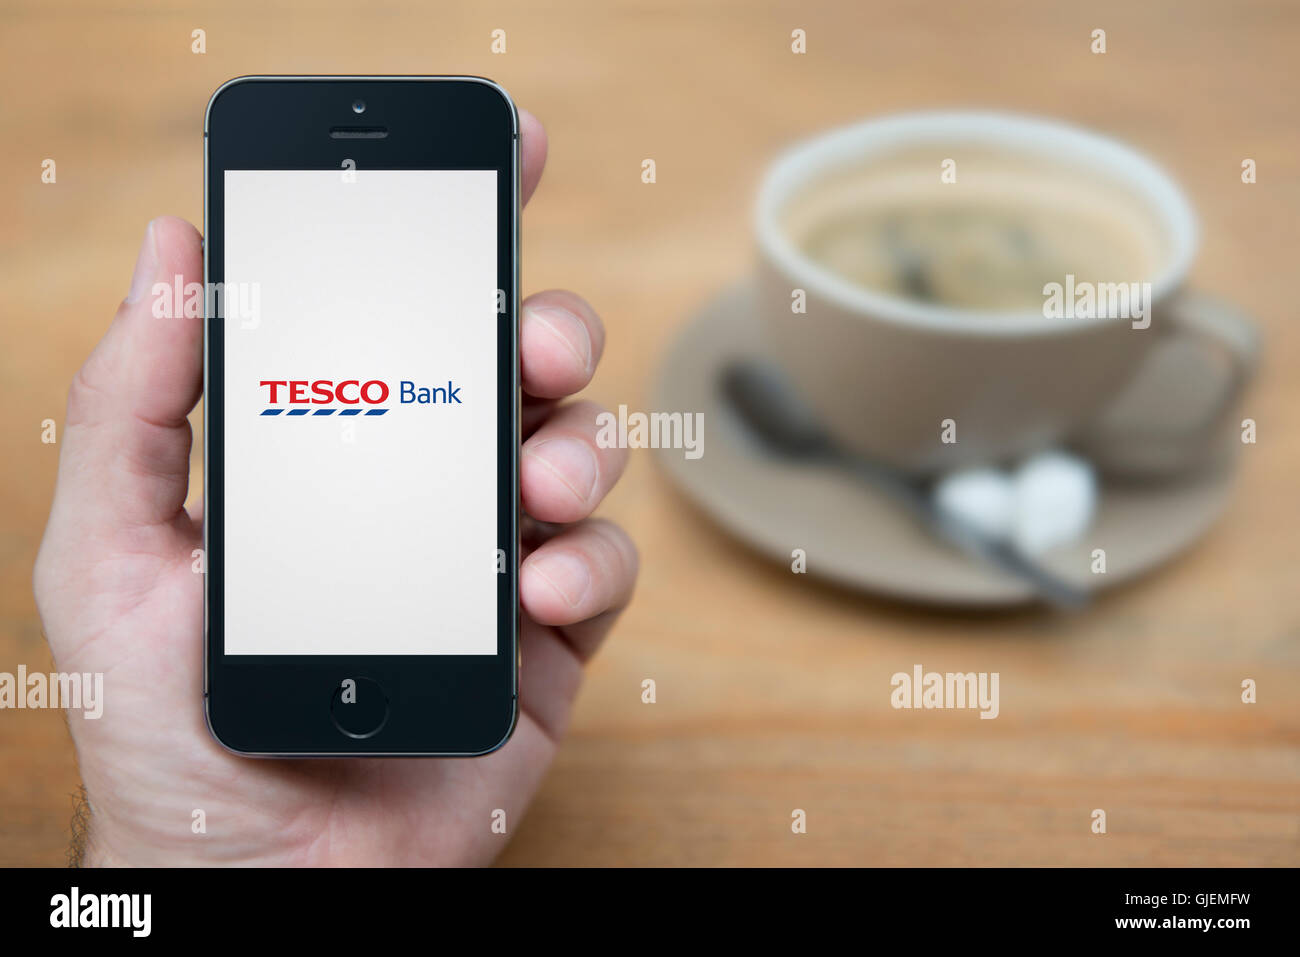 A man looks at his iPhone which displays the Tesco Bank logo, while sat with a cup of coffee (Editorial use only). Stock Photo